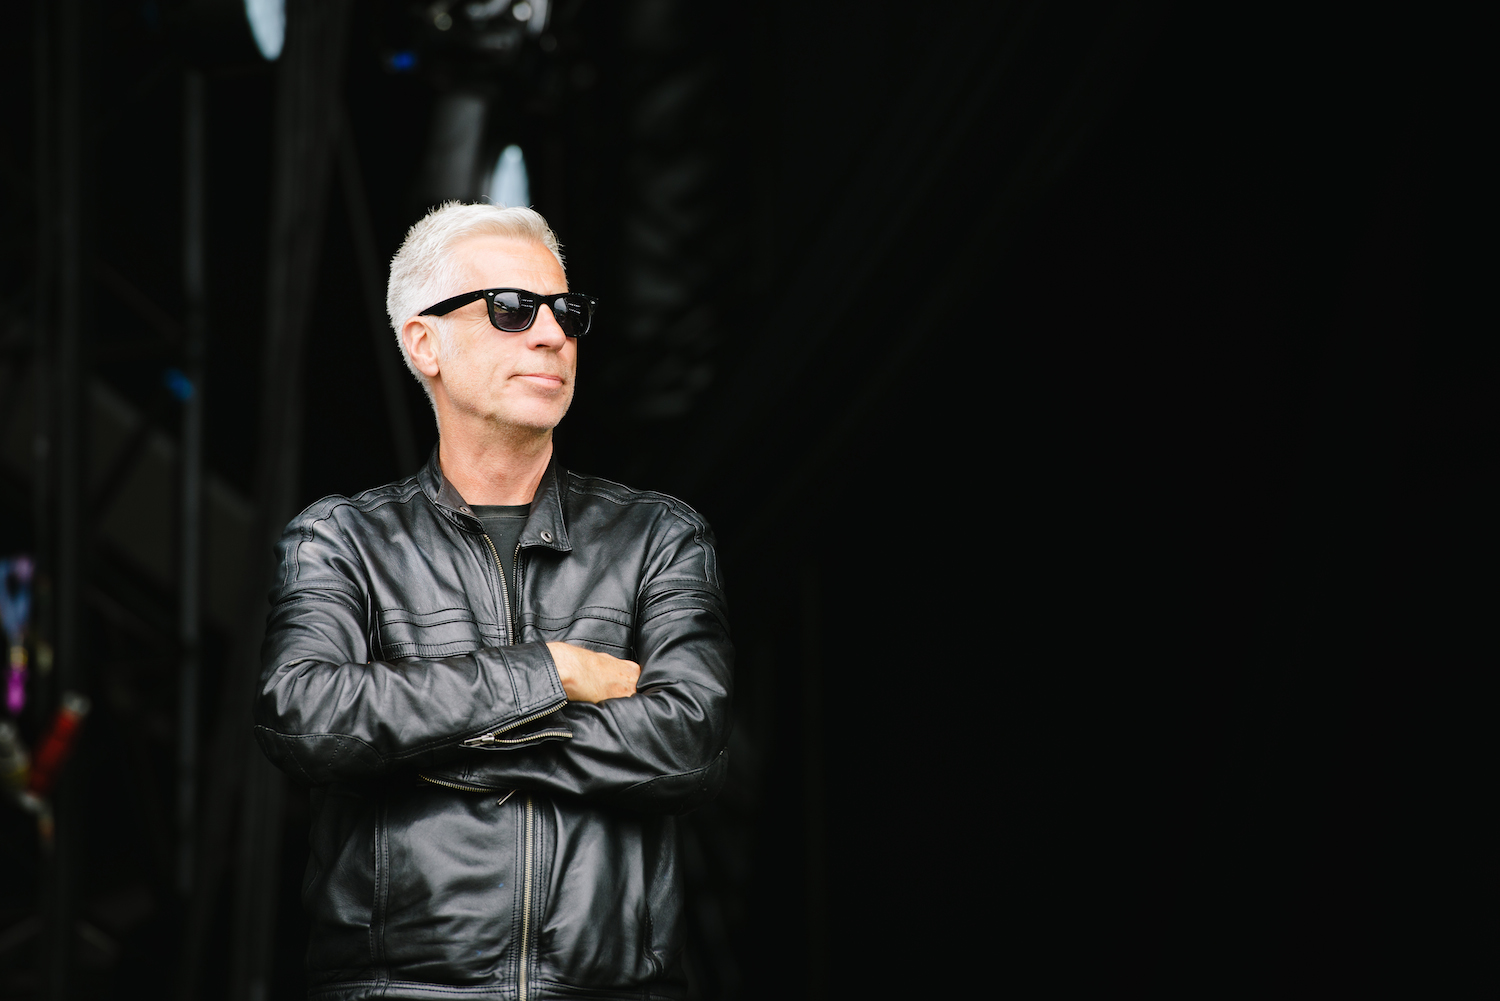 John Giddings on the Isle Of Wight Festival: “Characters keep the music business alive”